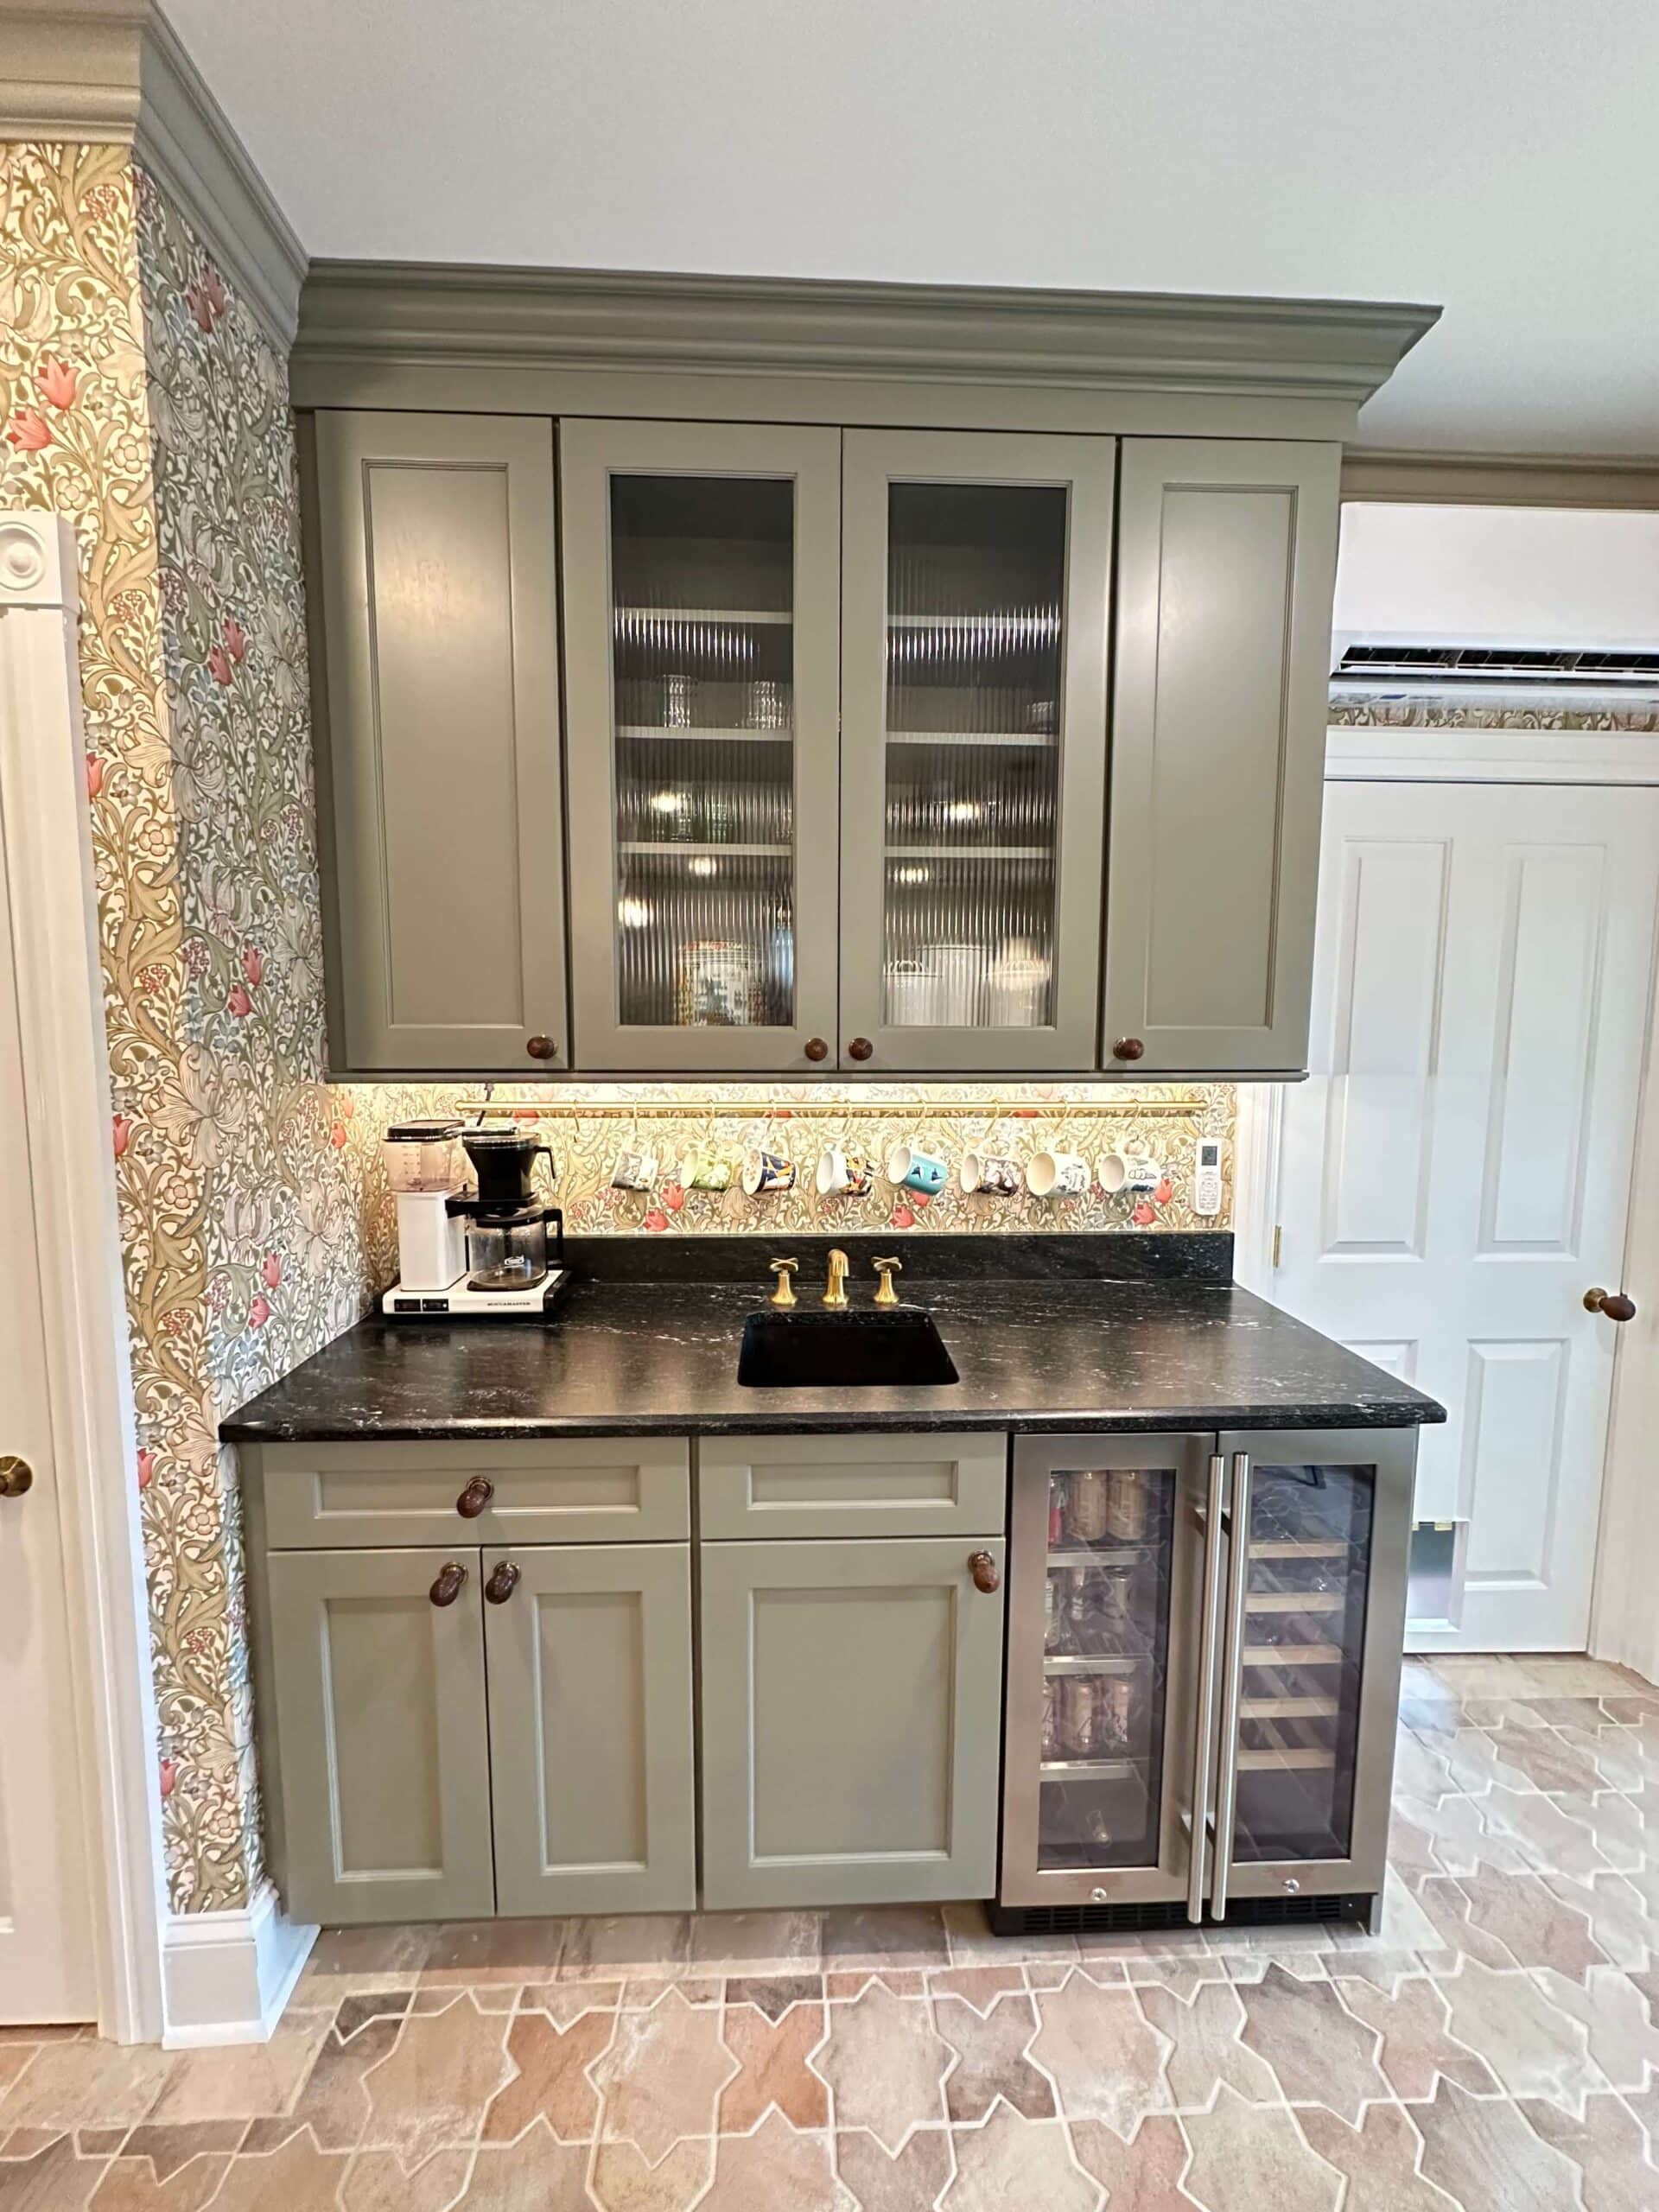 How To Color Match Painted Cabinets